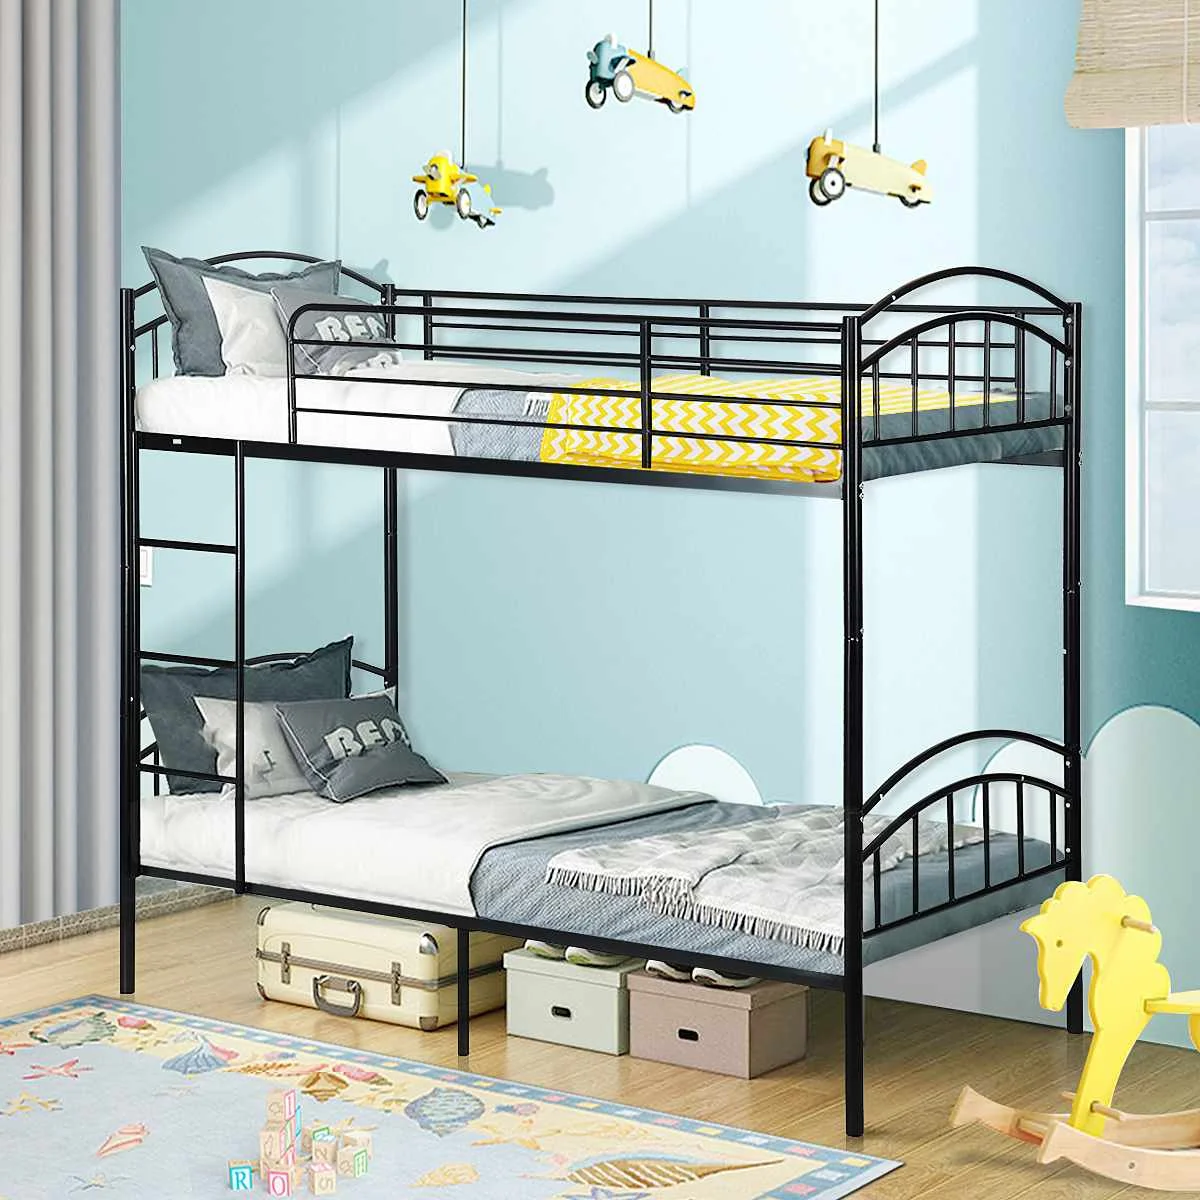 

Metal Twin over Twin Bunk Beds Frame Convertible Bunk Bed for Kids Adult Children Bedroom Dormitory US